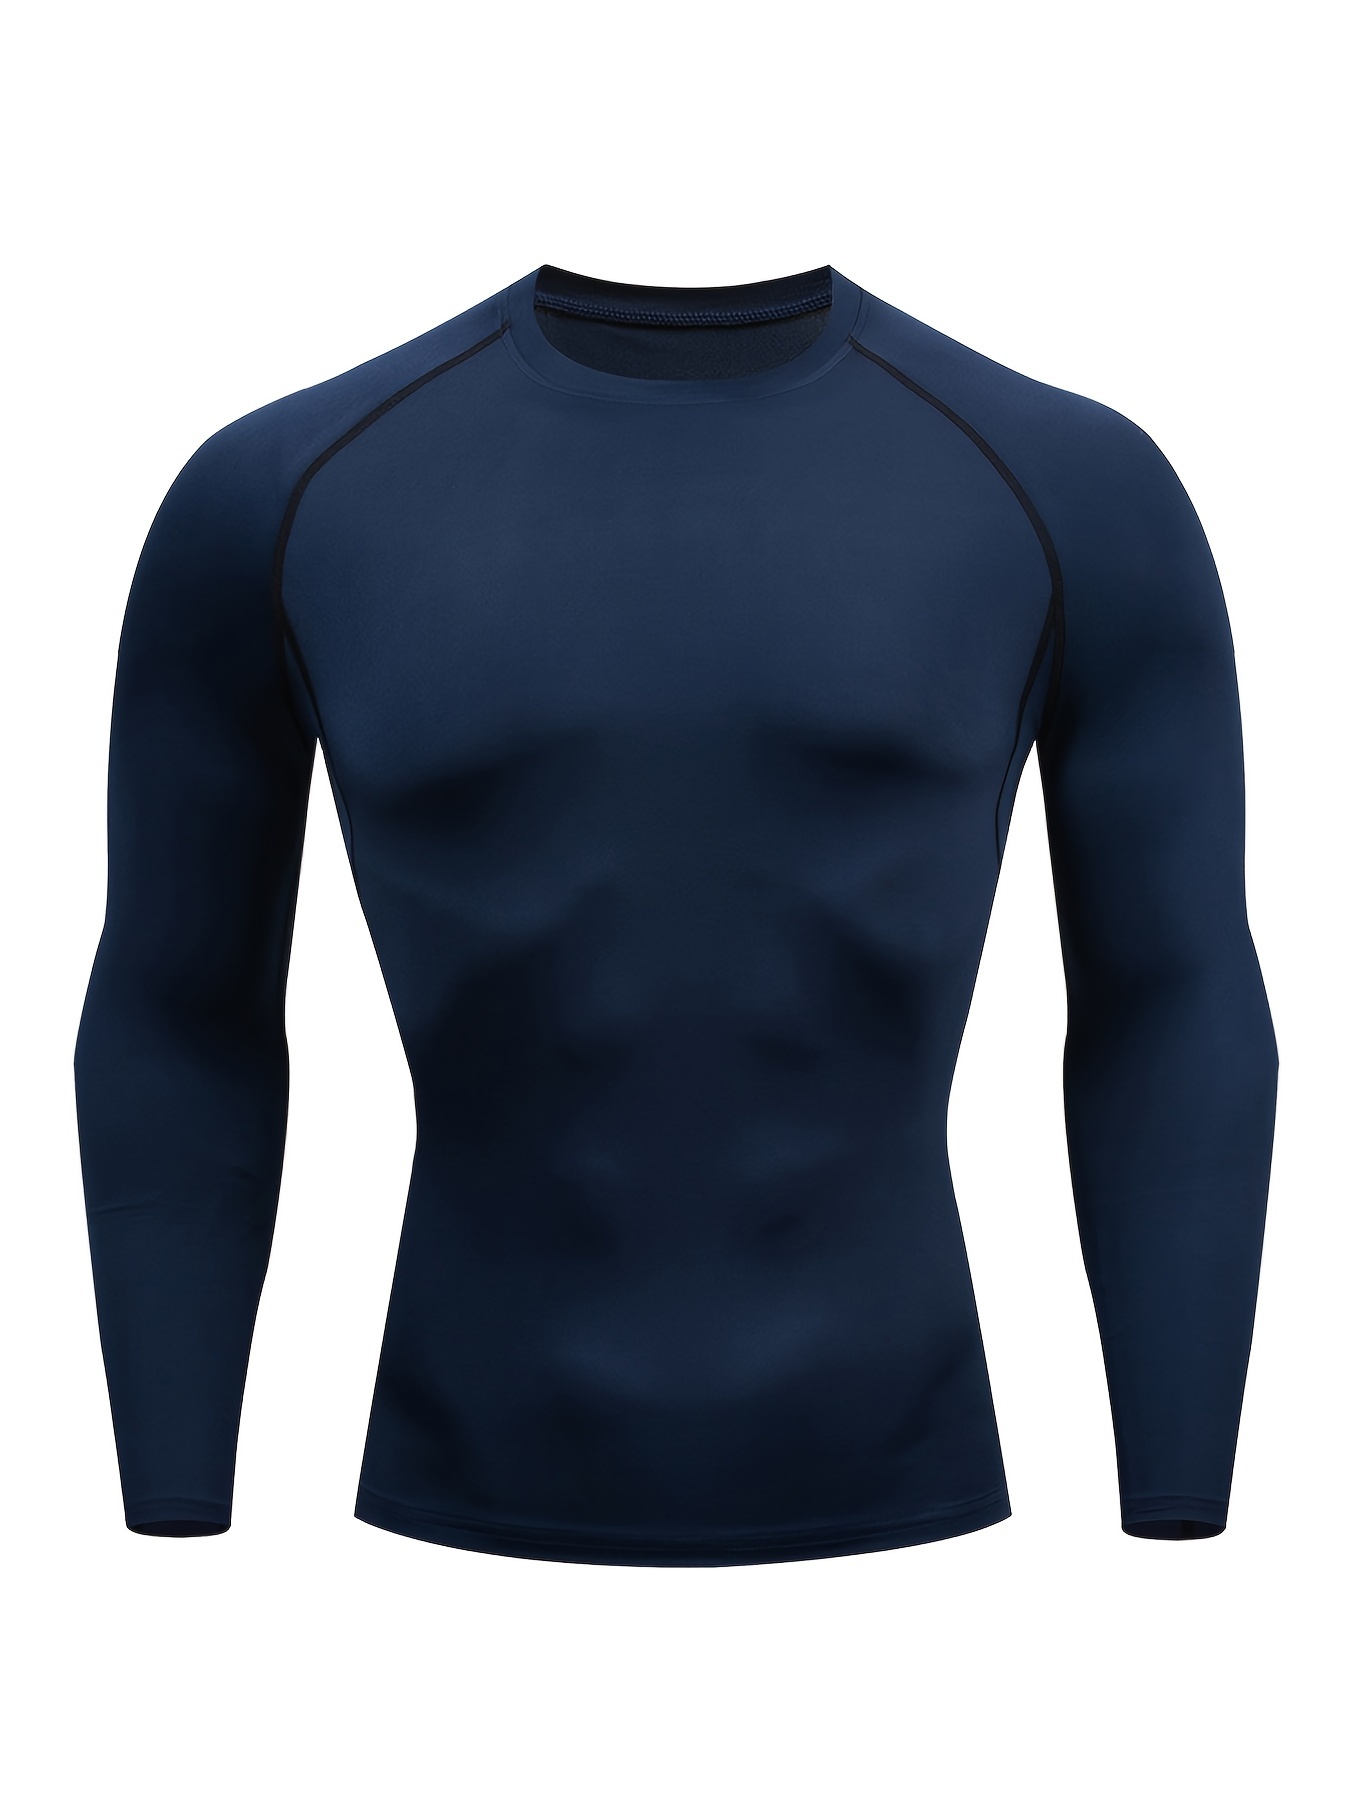 SKINS Men's A400 Compression Long Sleeve Top, Shirts -  Canada